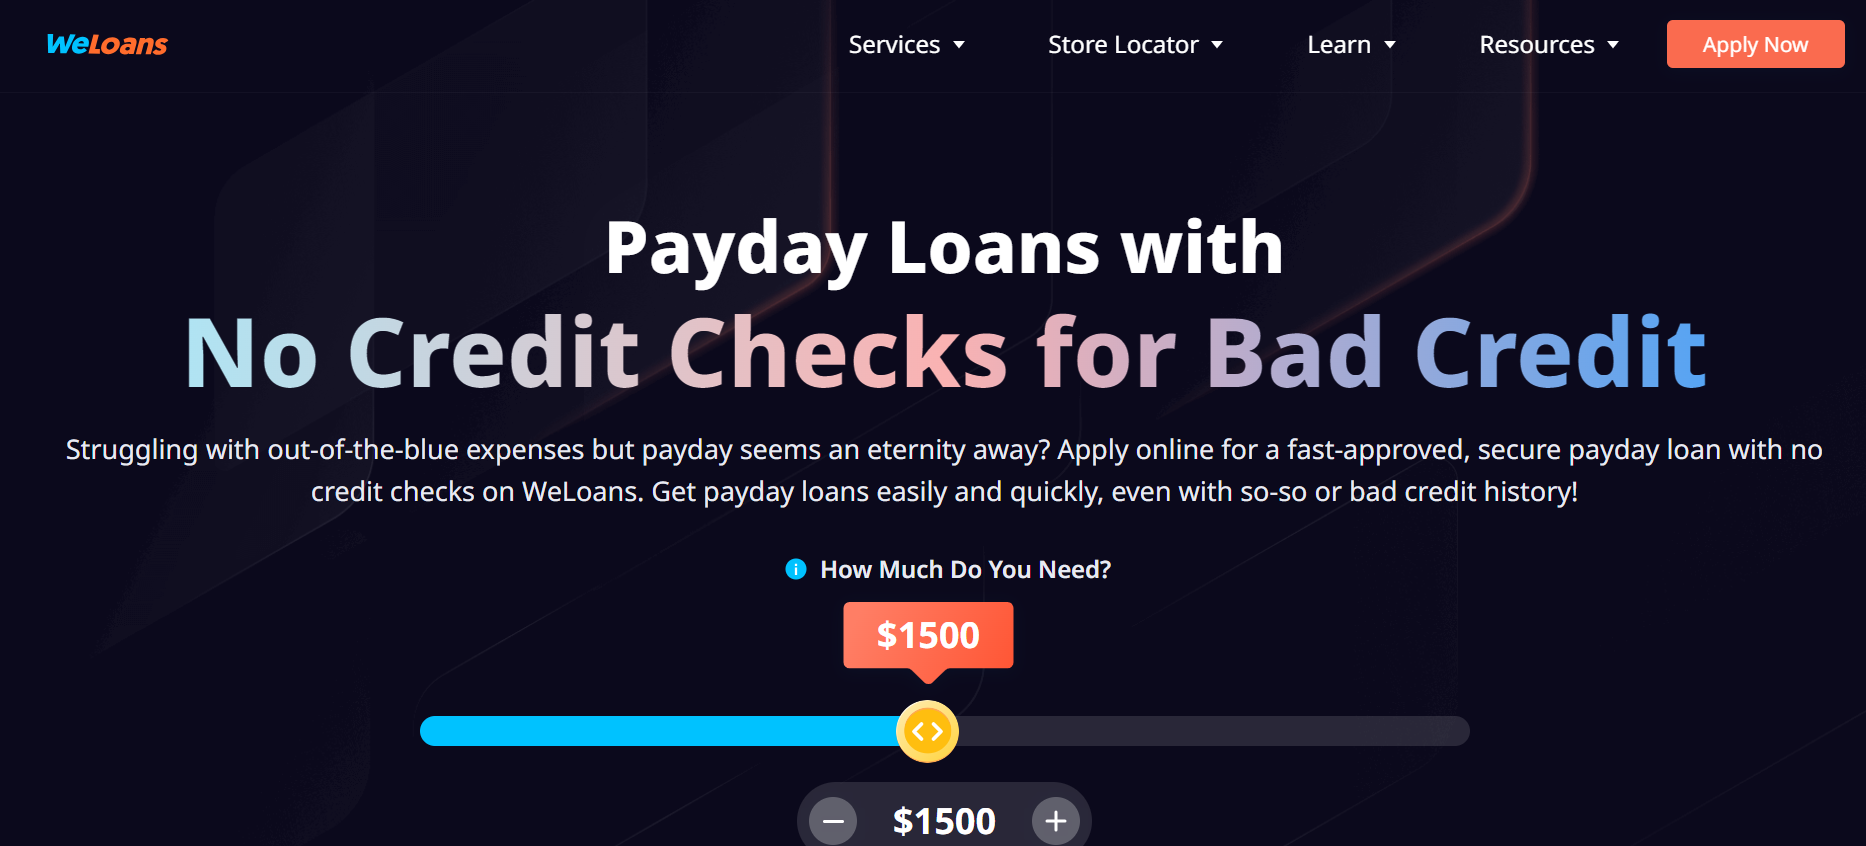 WeLoans Review: Top-Rated Online Payday Loan Provider for Challenging Credit Situations